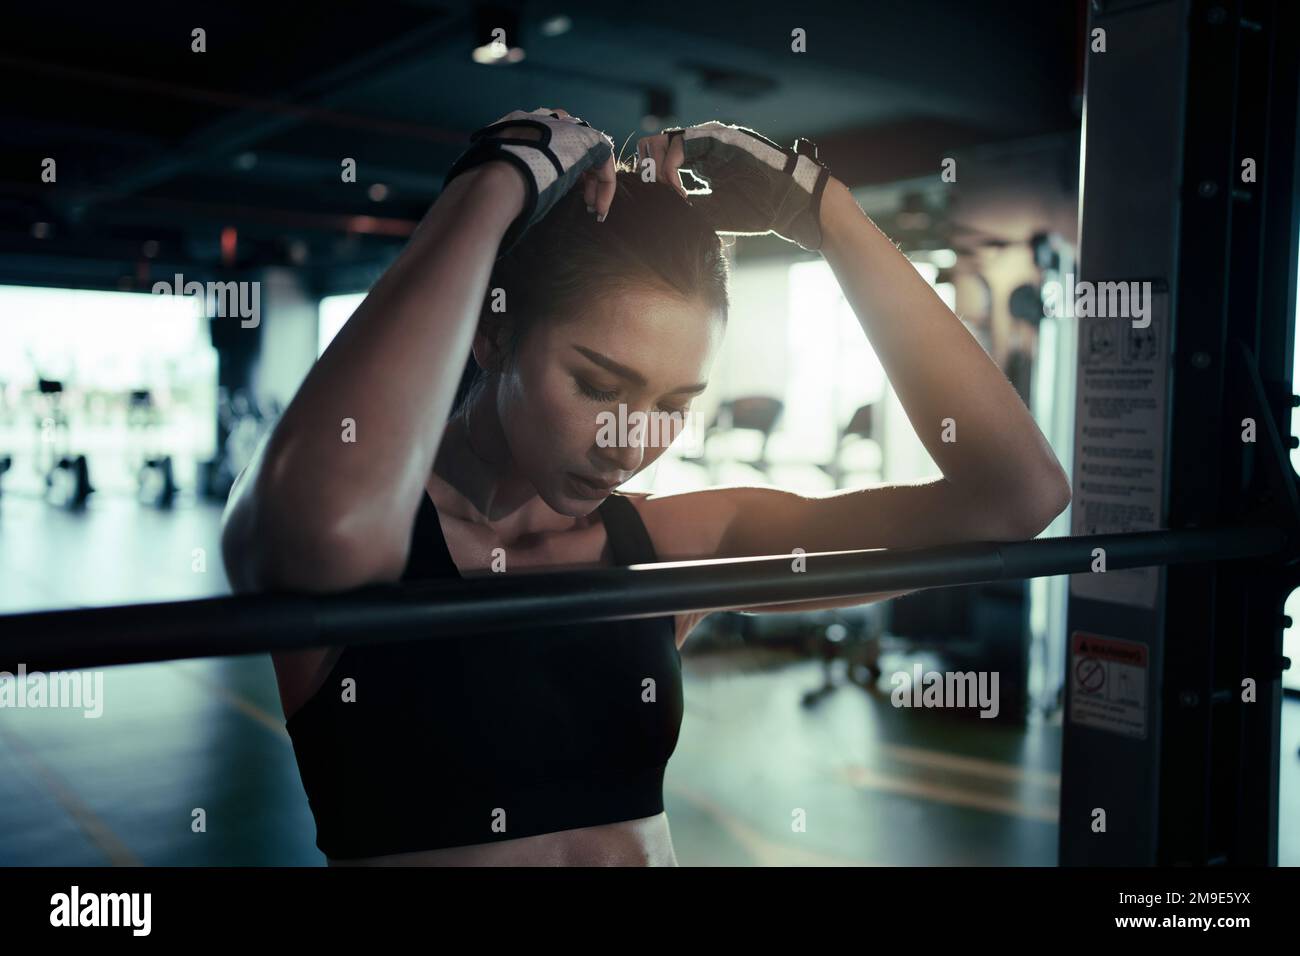 Tired woman taking break after weight lifting in gym. She keeps her eyes closed. Stock Photo